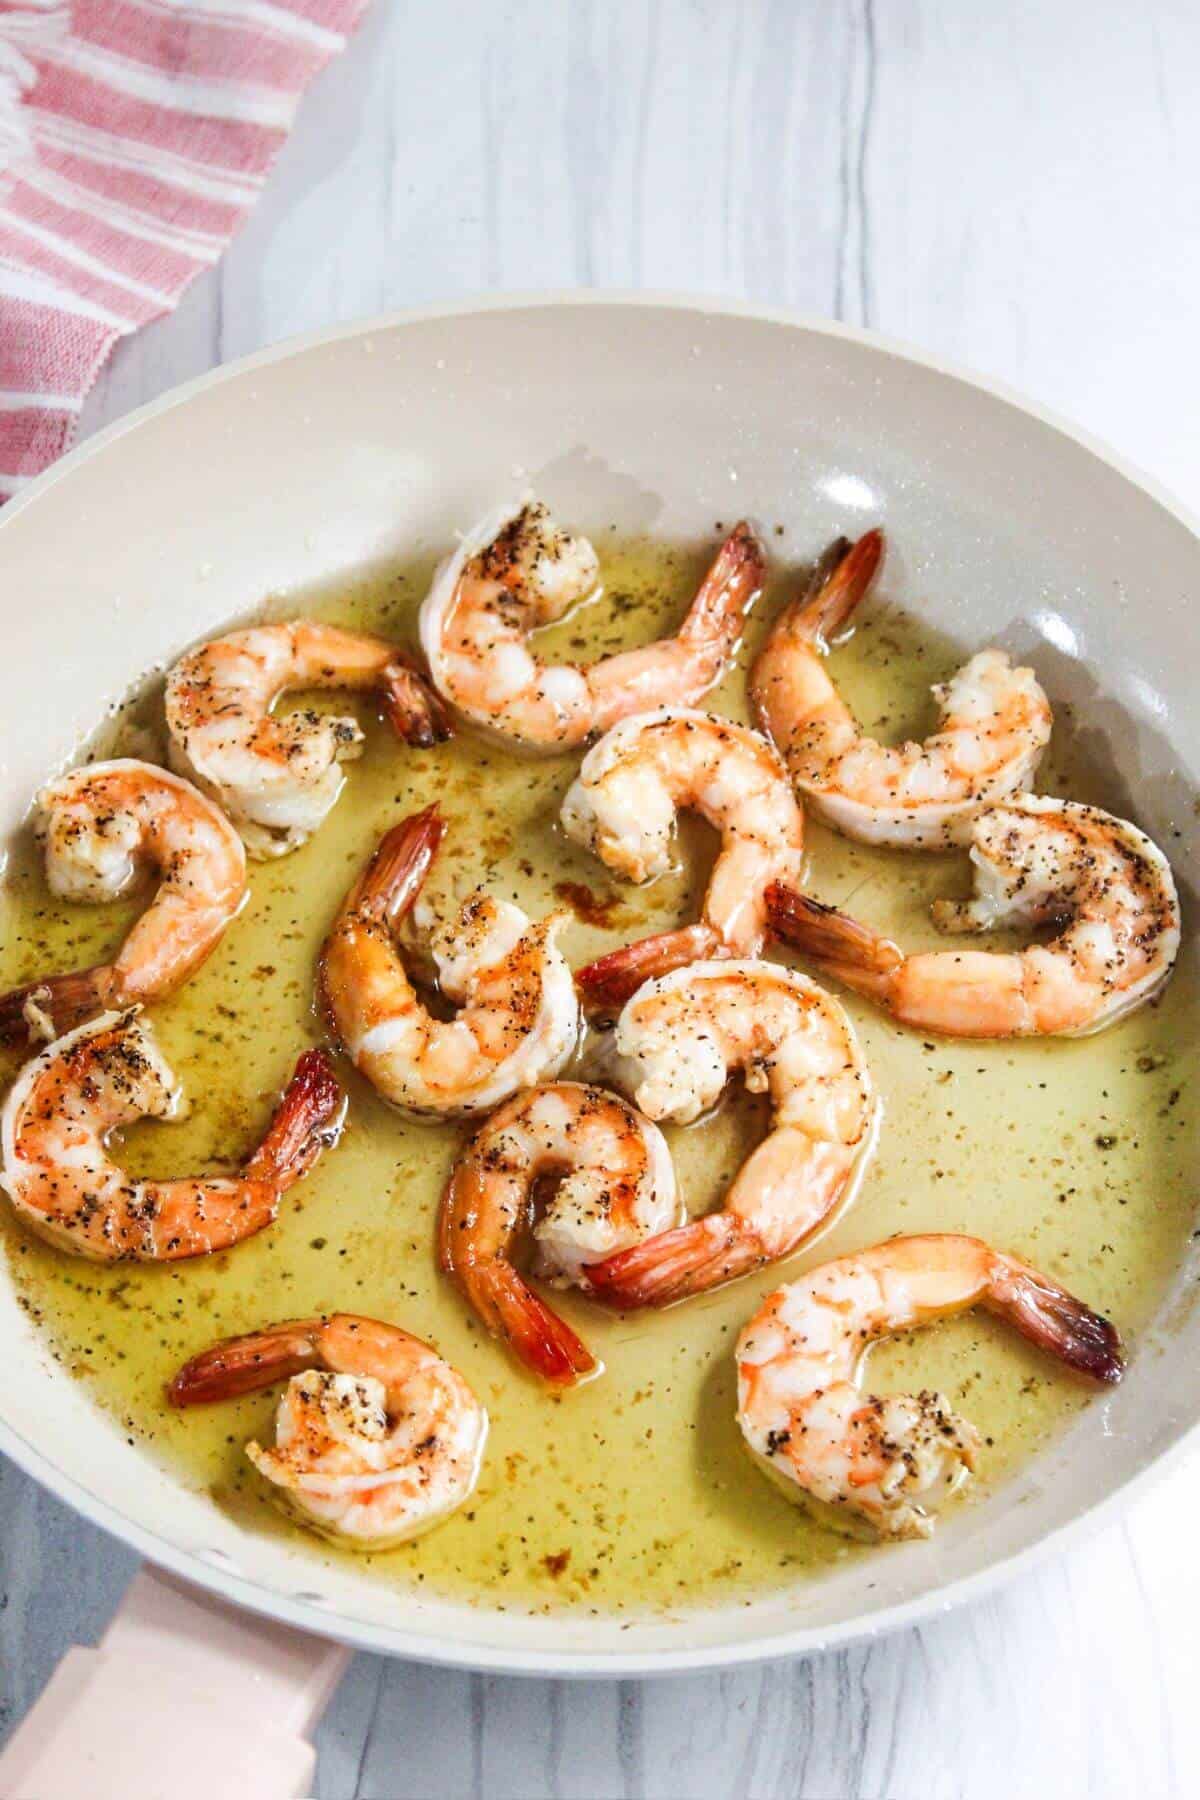 Shrimp in a frying pan with olive oil.